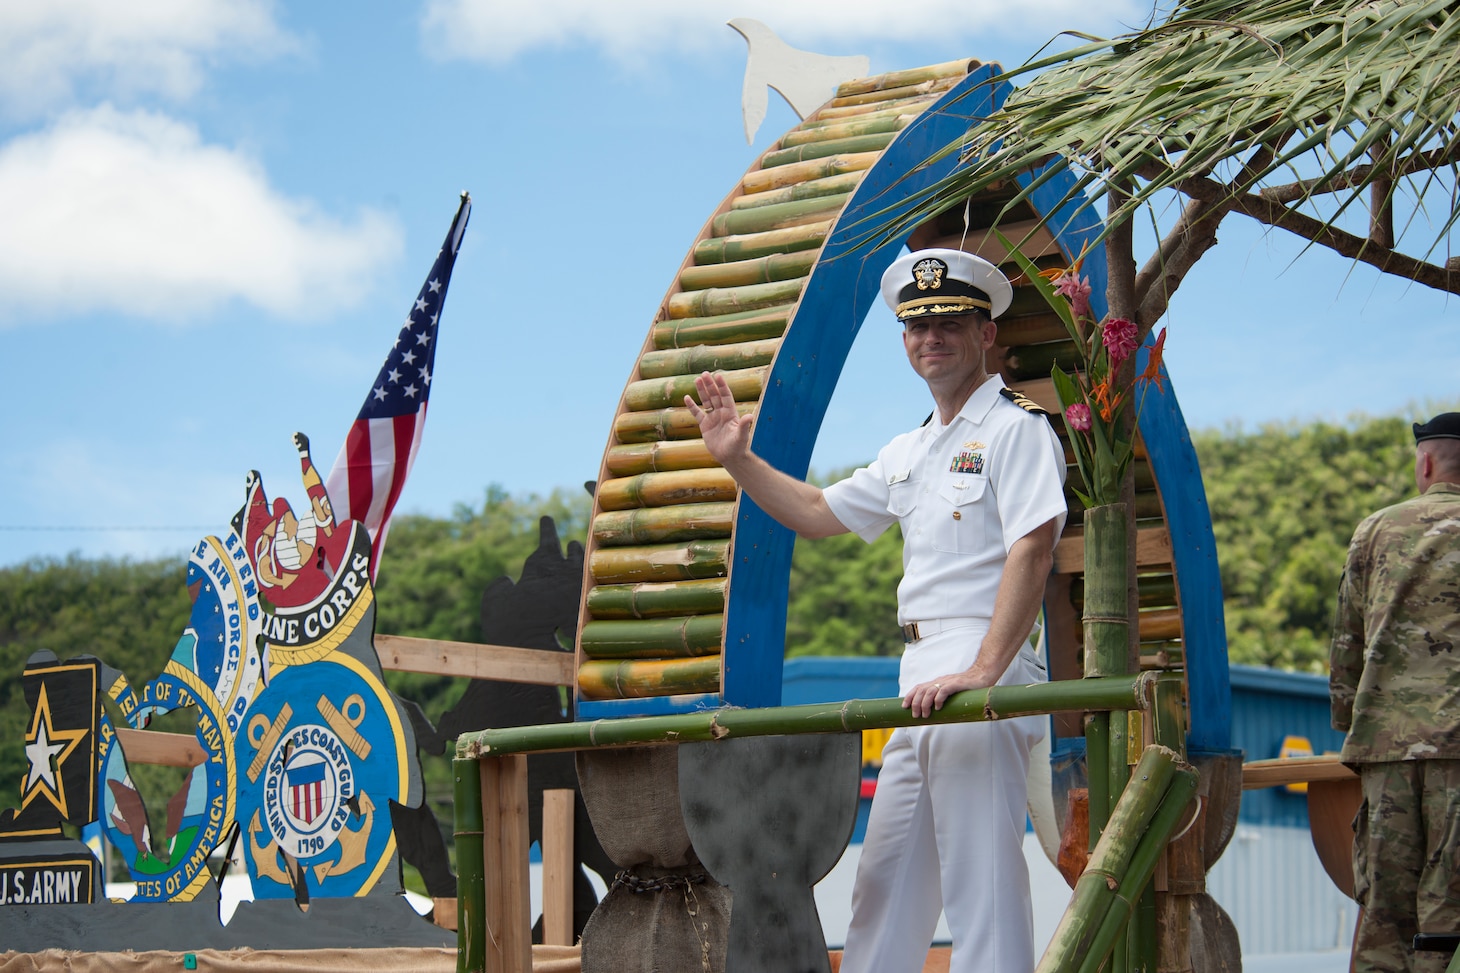 190721-N-AY639-0009 AGANA, Guam (July 21, 2019) Cmdr. David Cox, deputy commander of Commander, Submarine Squadron Fifteen, waves to parade attendees from the Inarajan village float during the annual Guam Liberation Day Parade, July 21. The celebration commemorates the 75th anniversary of the liberation of Guam from Japanese occupation by U.S. forces during World War II.